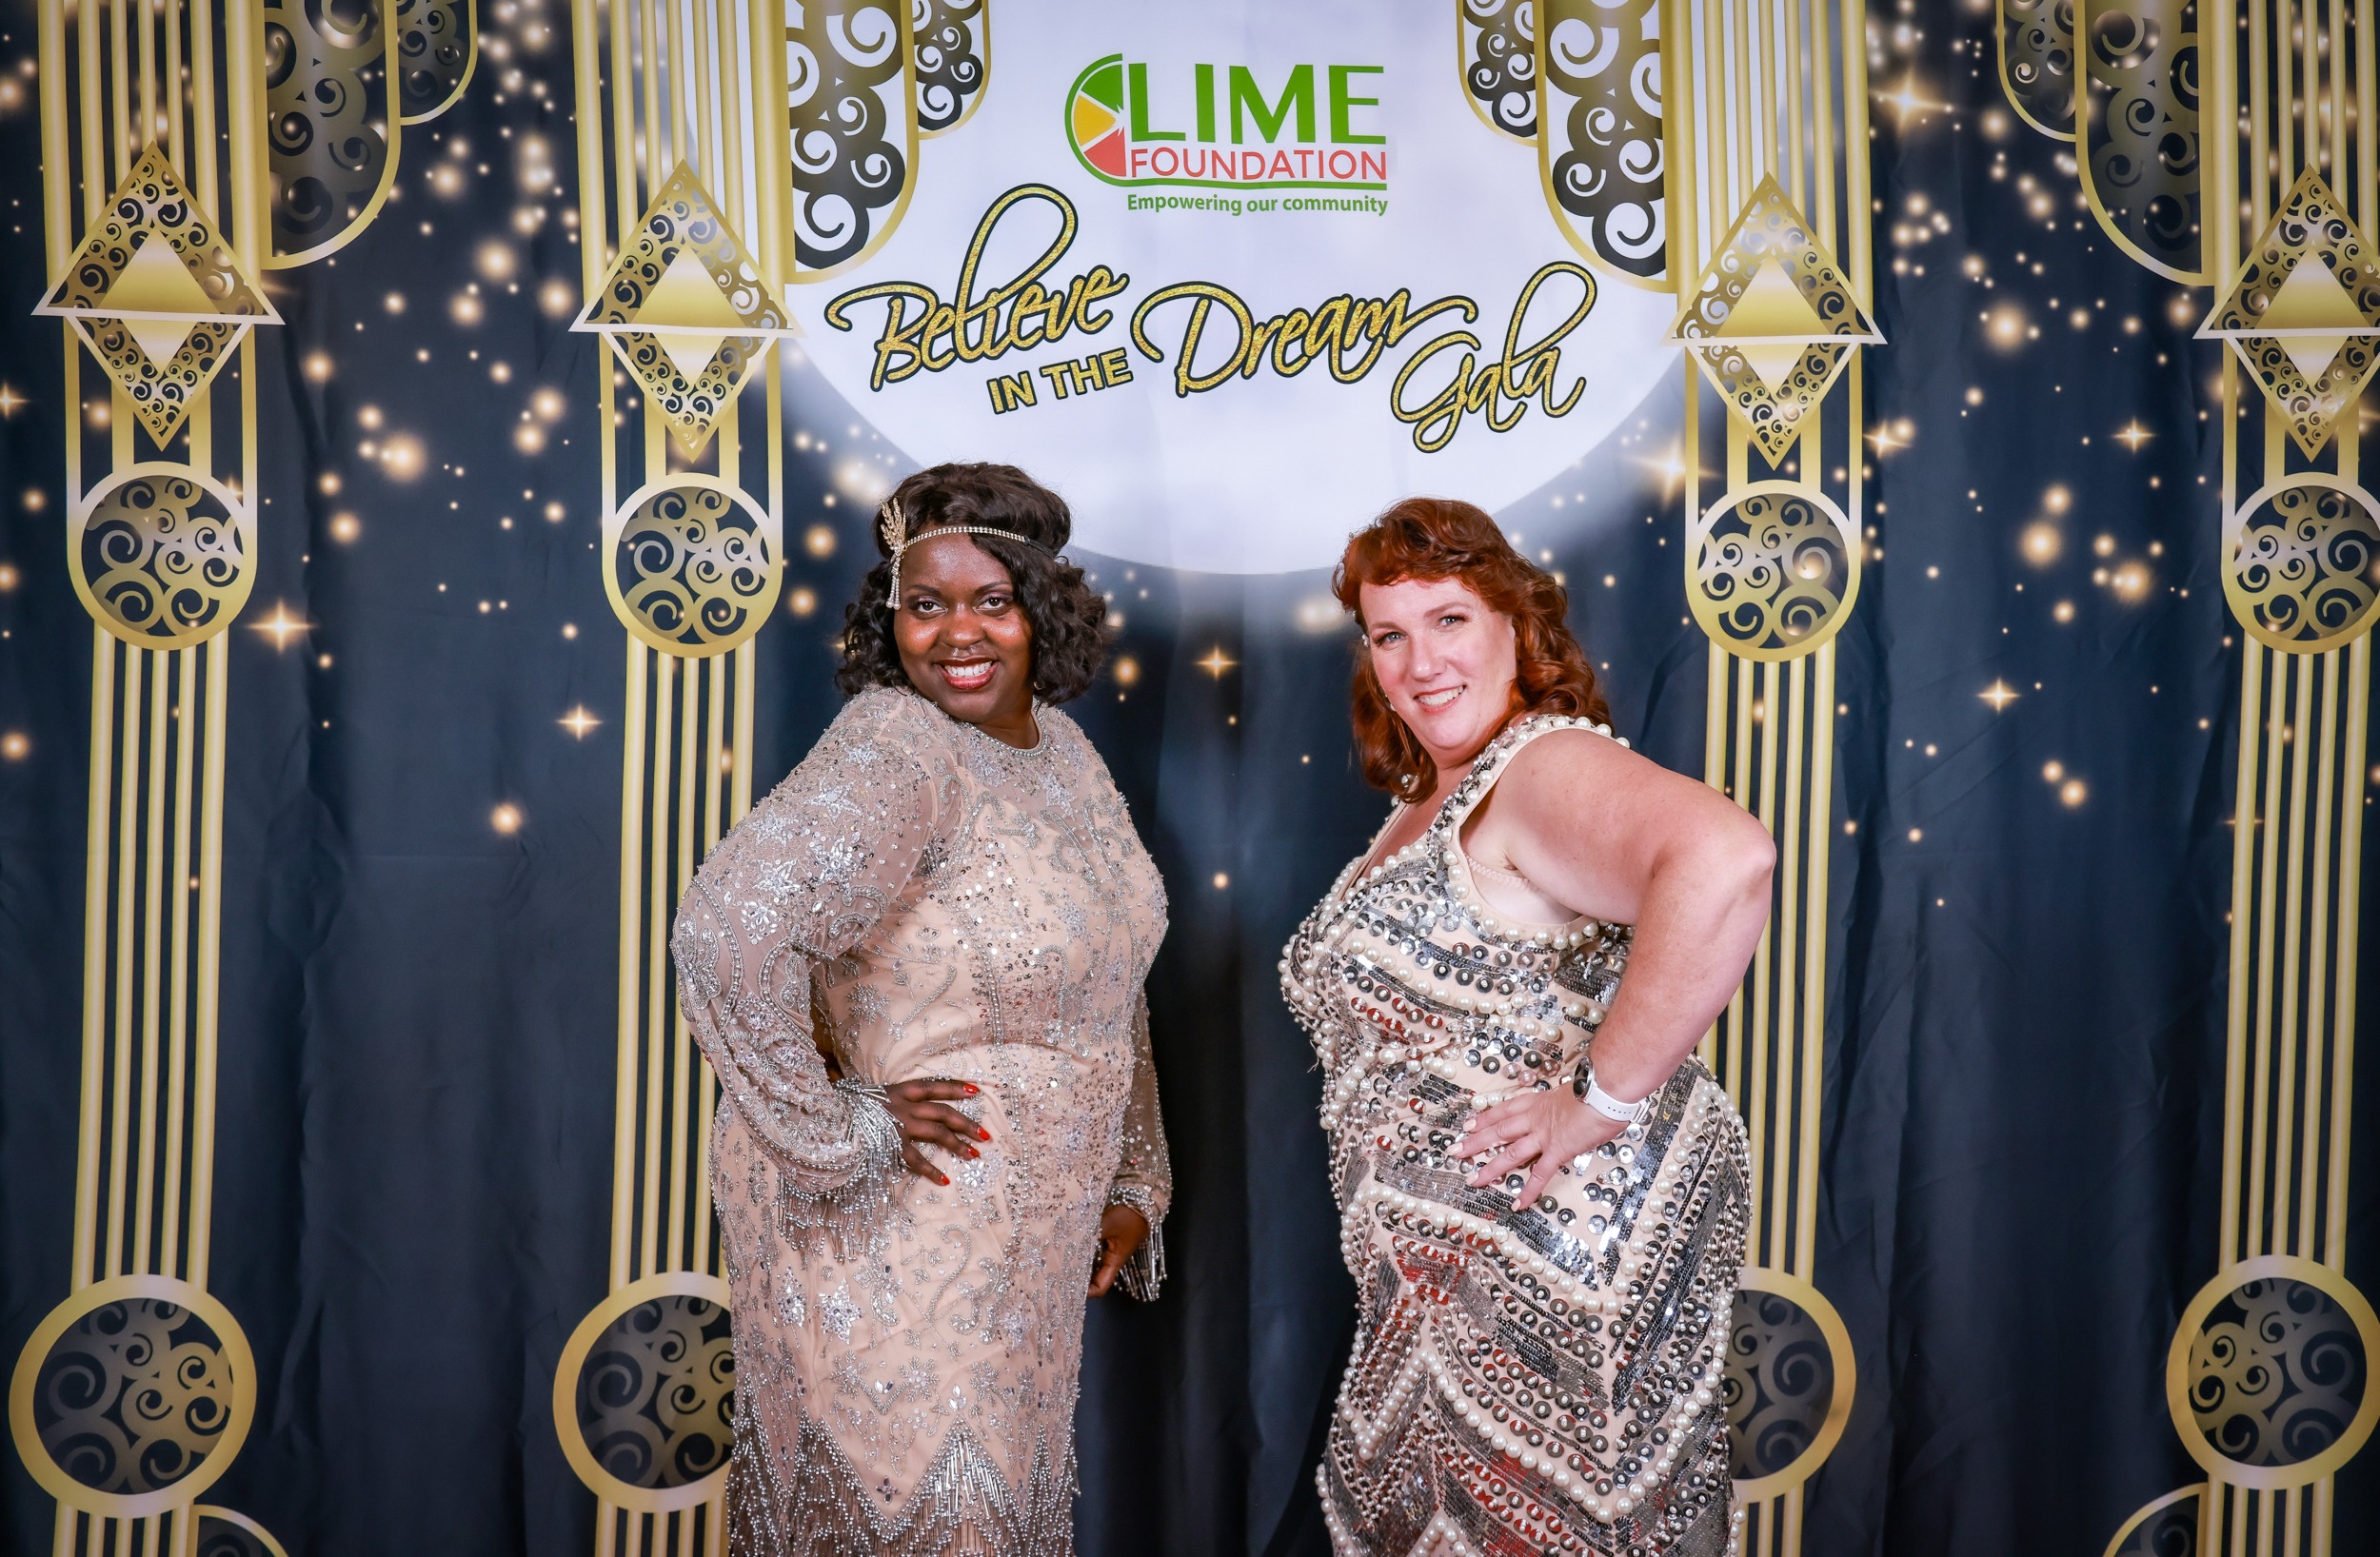 Two women posing for a photo in front of a backdrop at The LIME Foundation, a non-profit organization in Sonoma County.